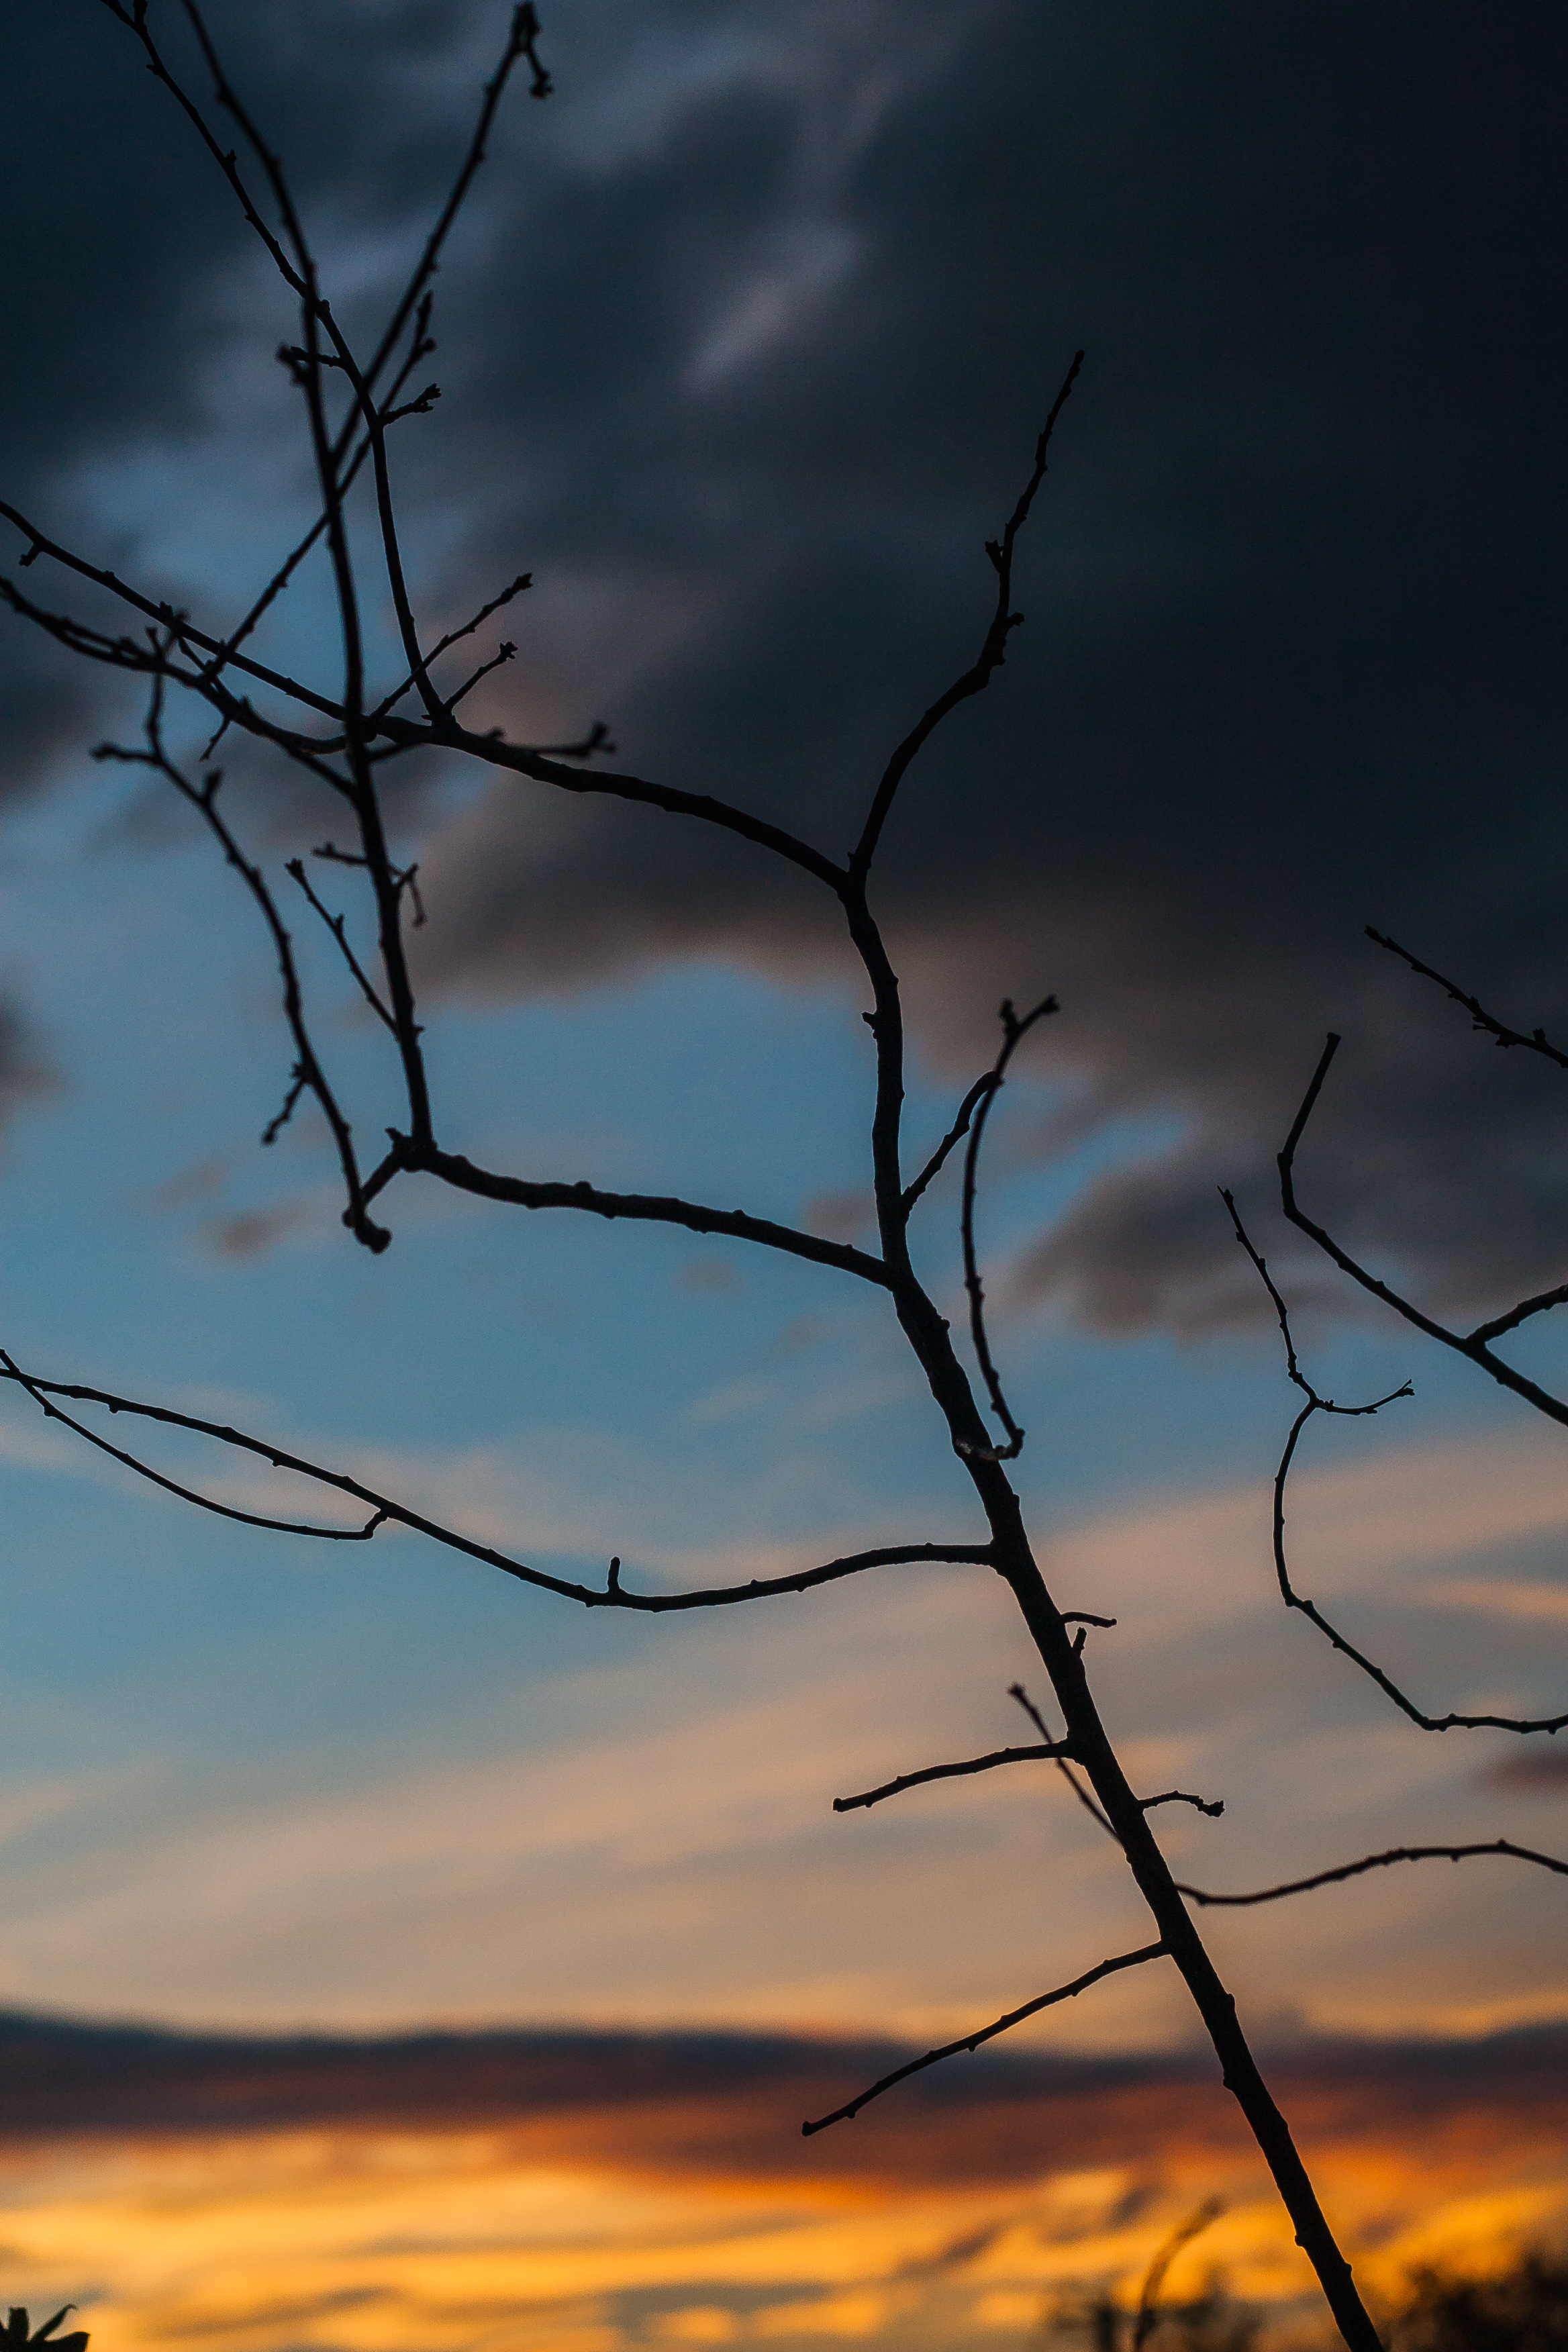 bare naked tree, no leaves against the sunset